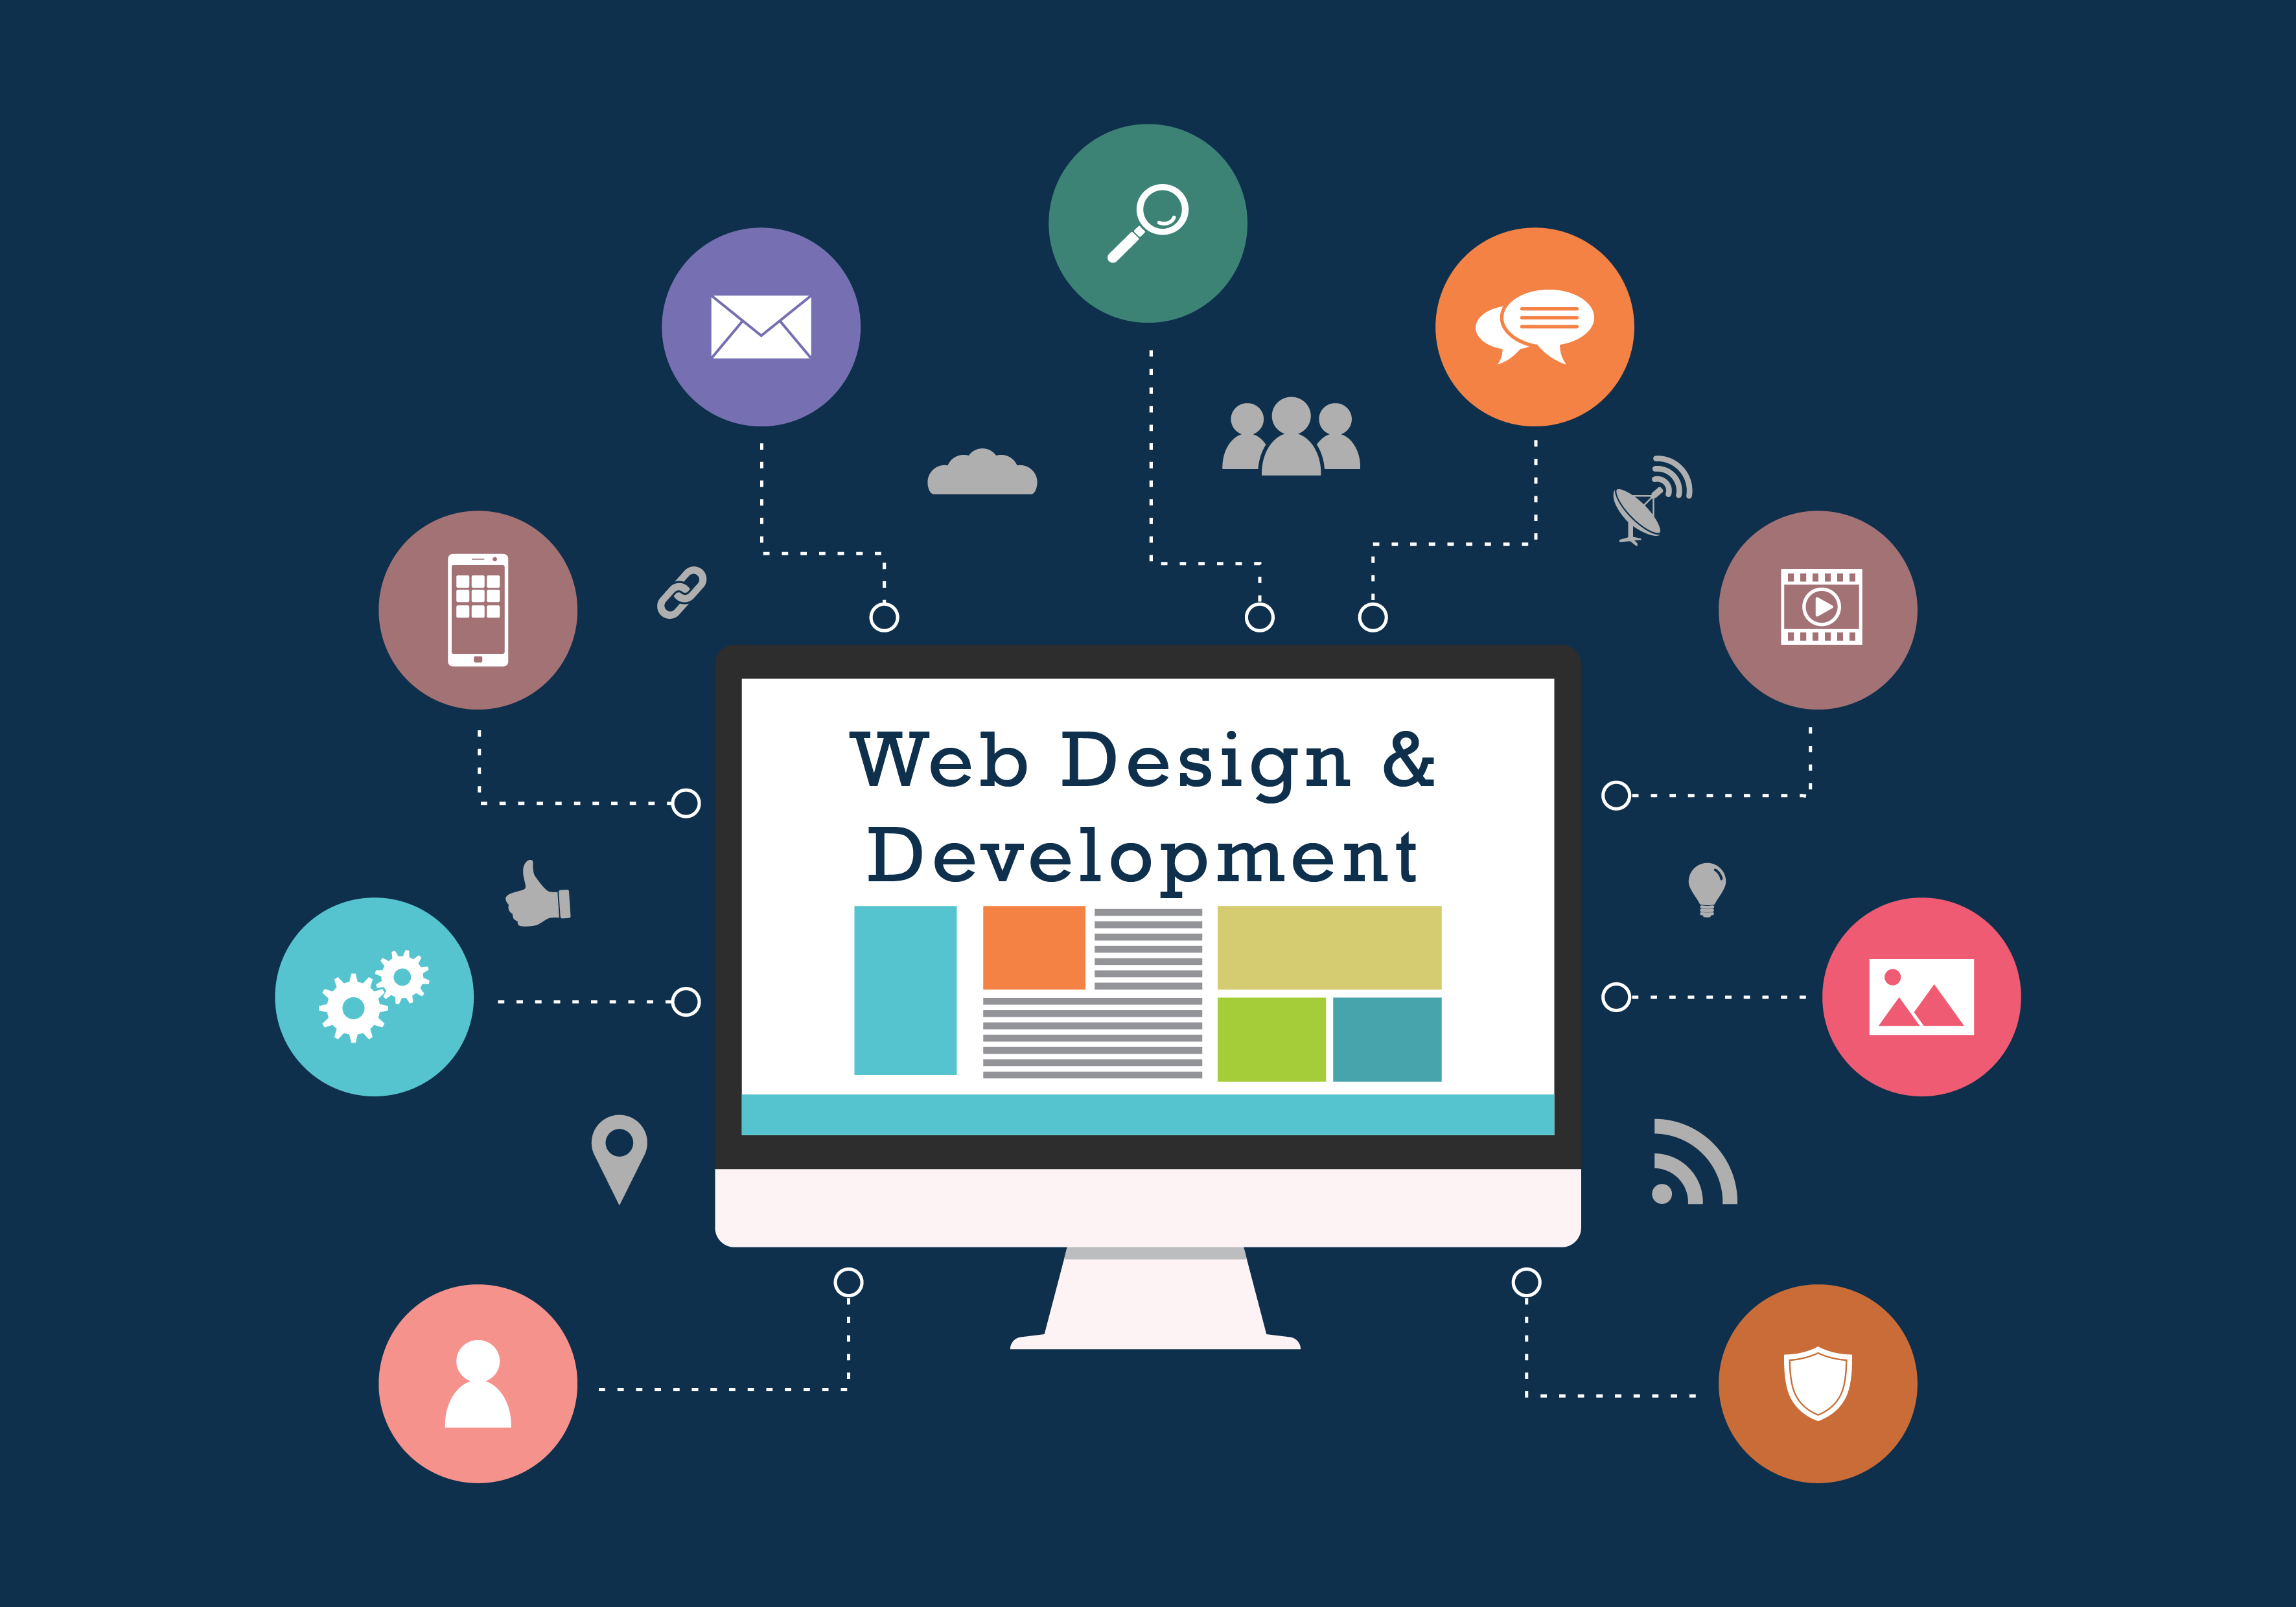 5 things you should check before hiring a web design agency.